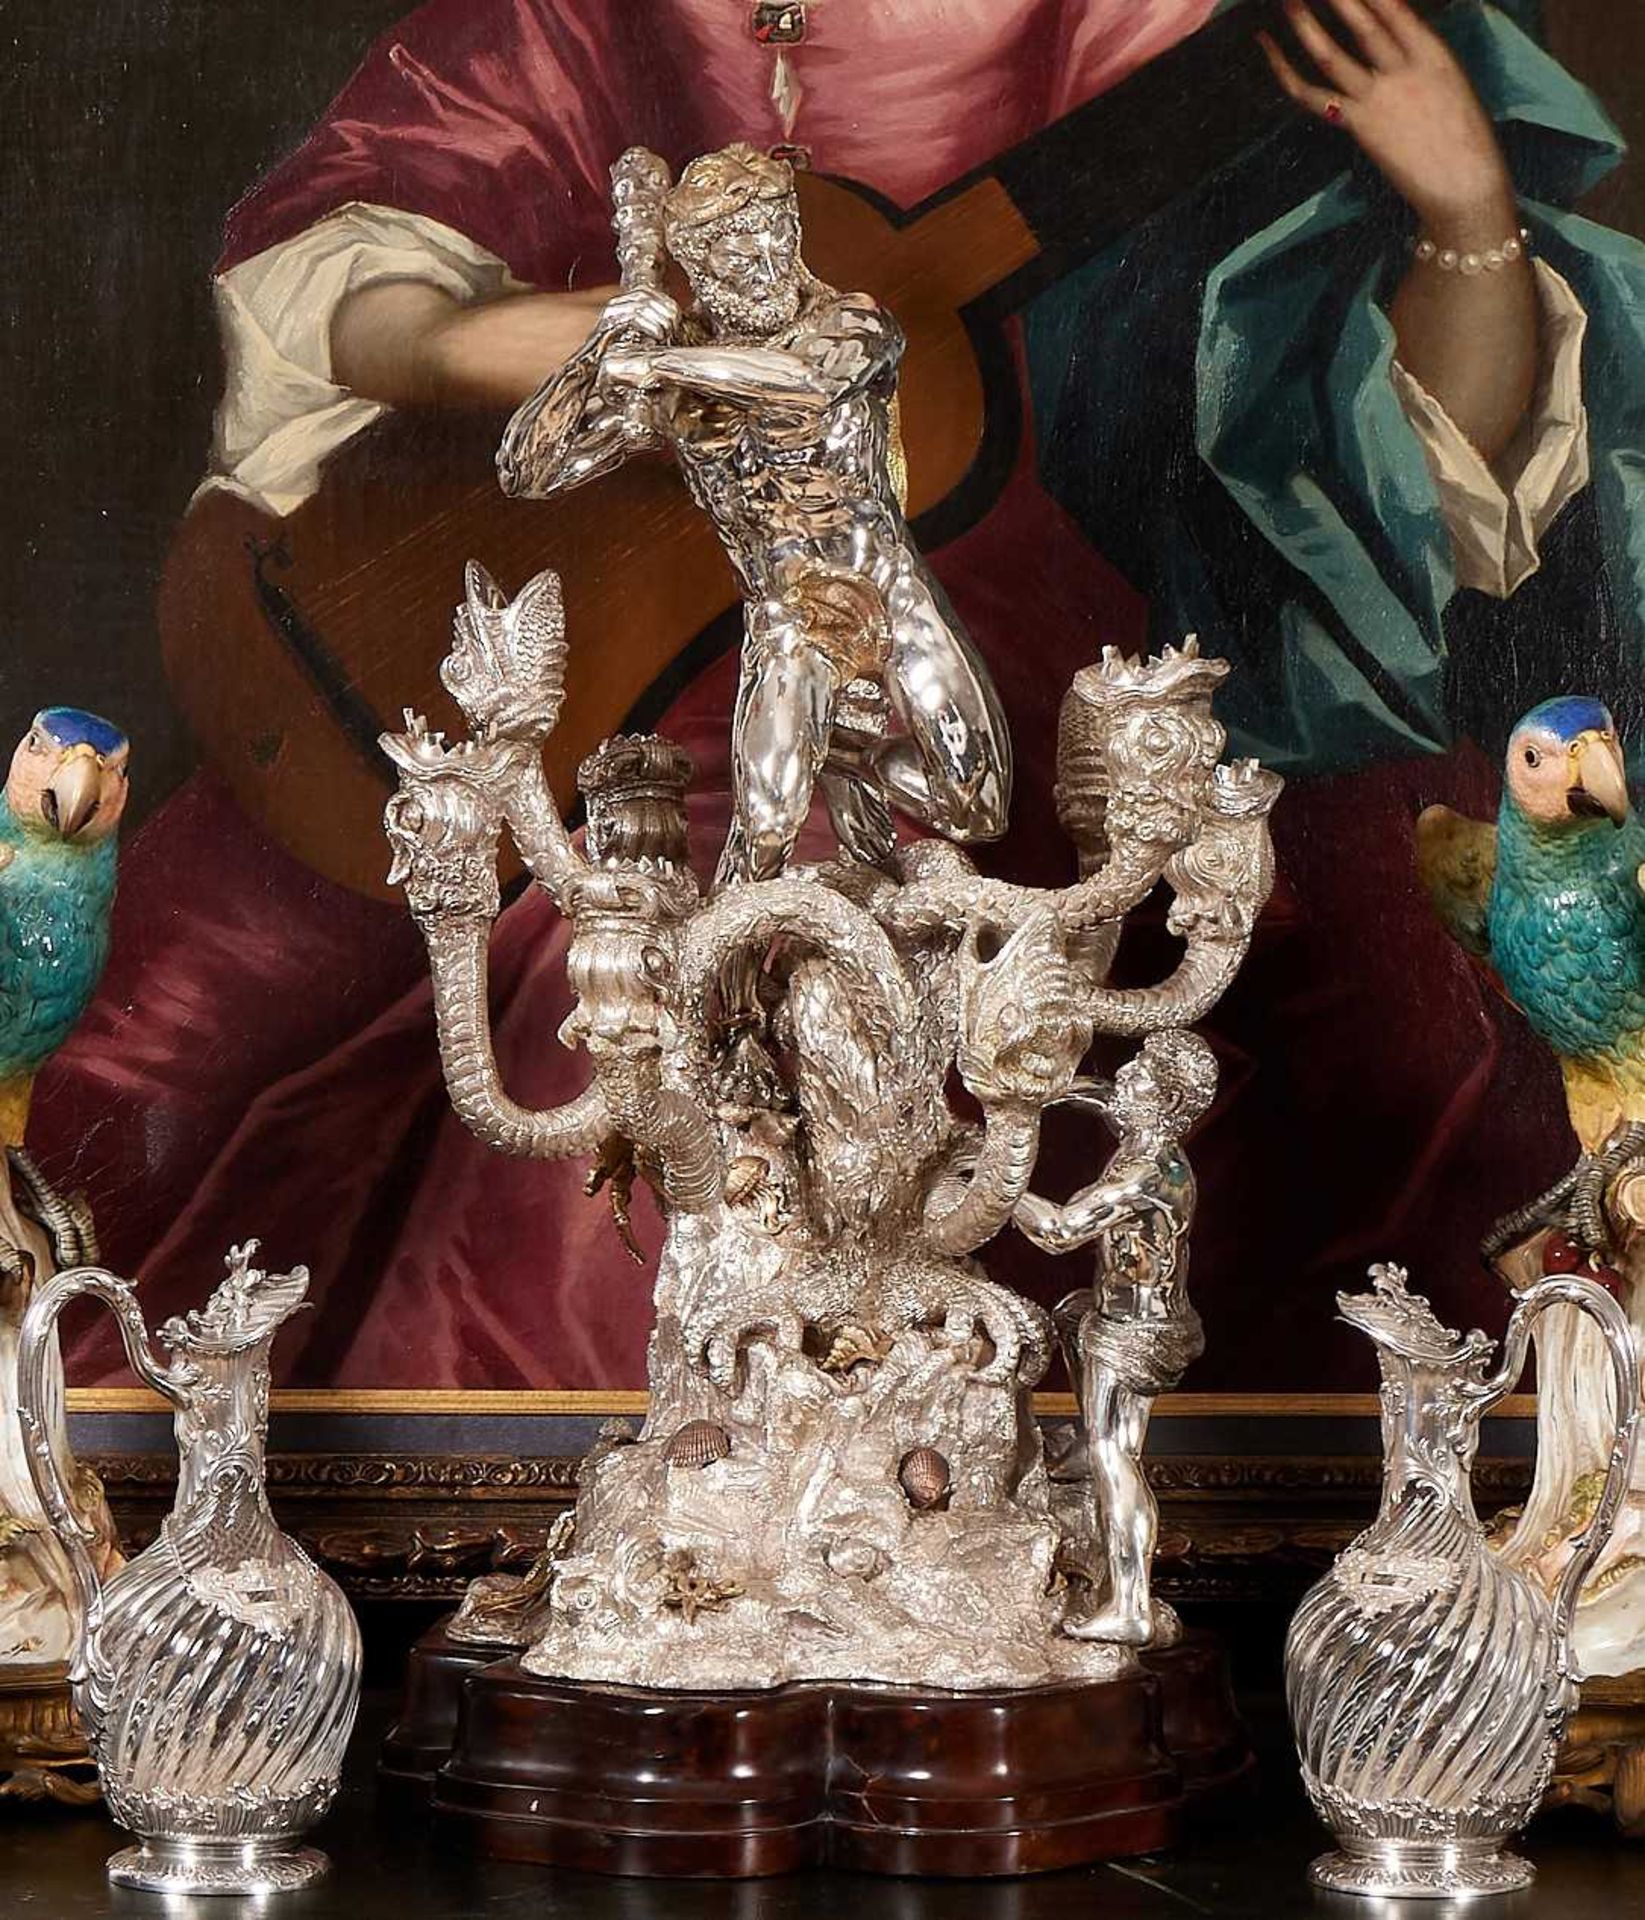 A MASSIVE SILVER CENTREPIECE AFTER THE DUKE OF YORK HERCULES AND HYDRA GROUP OF 1824